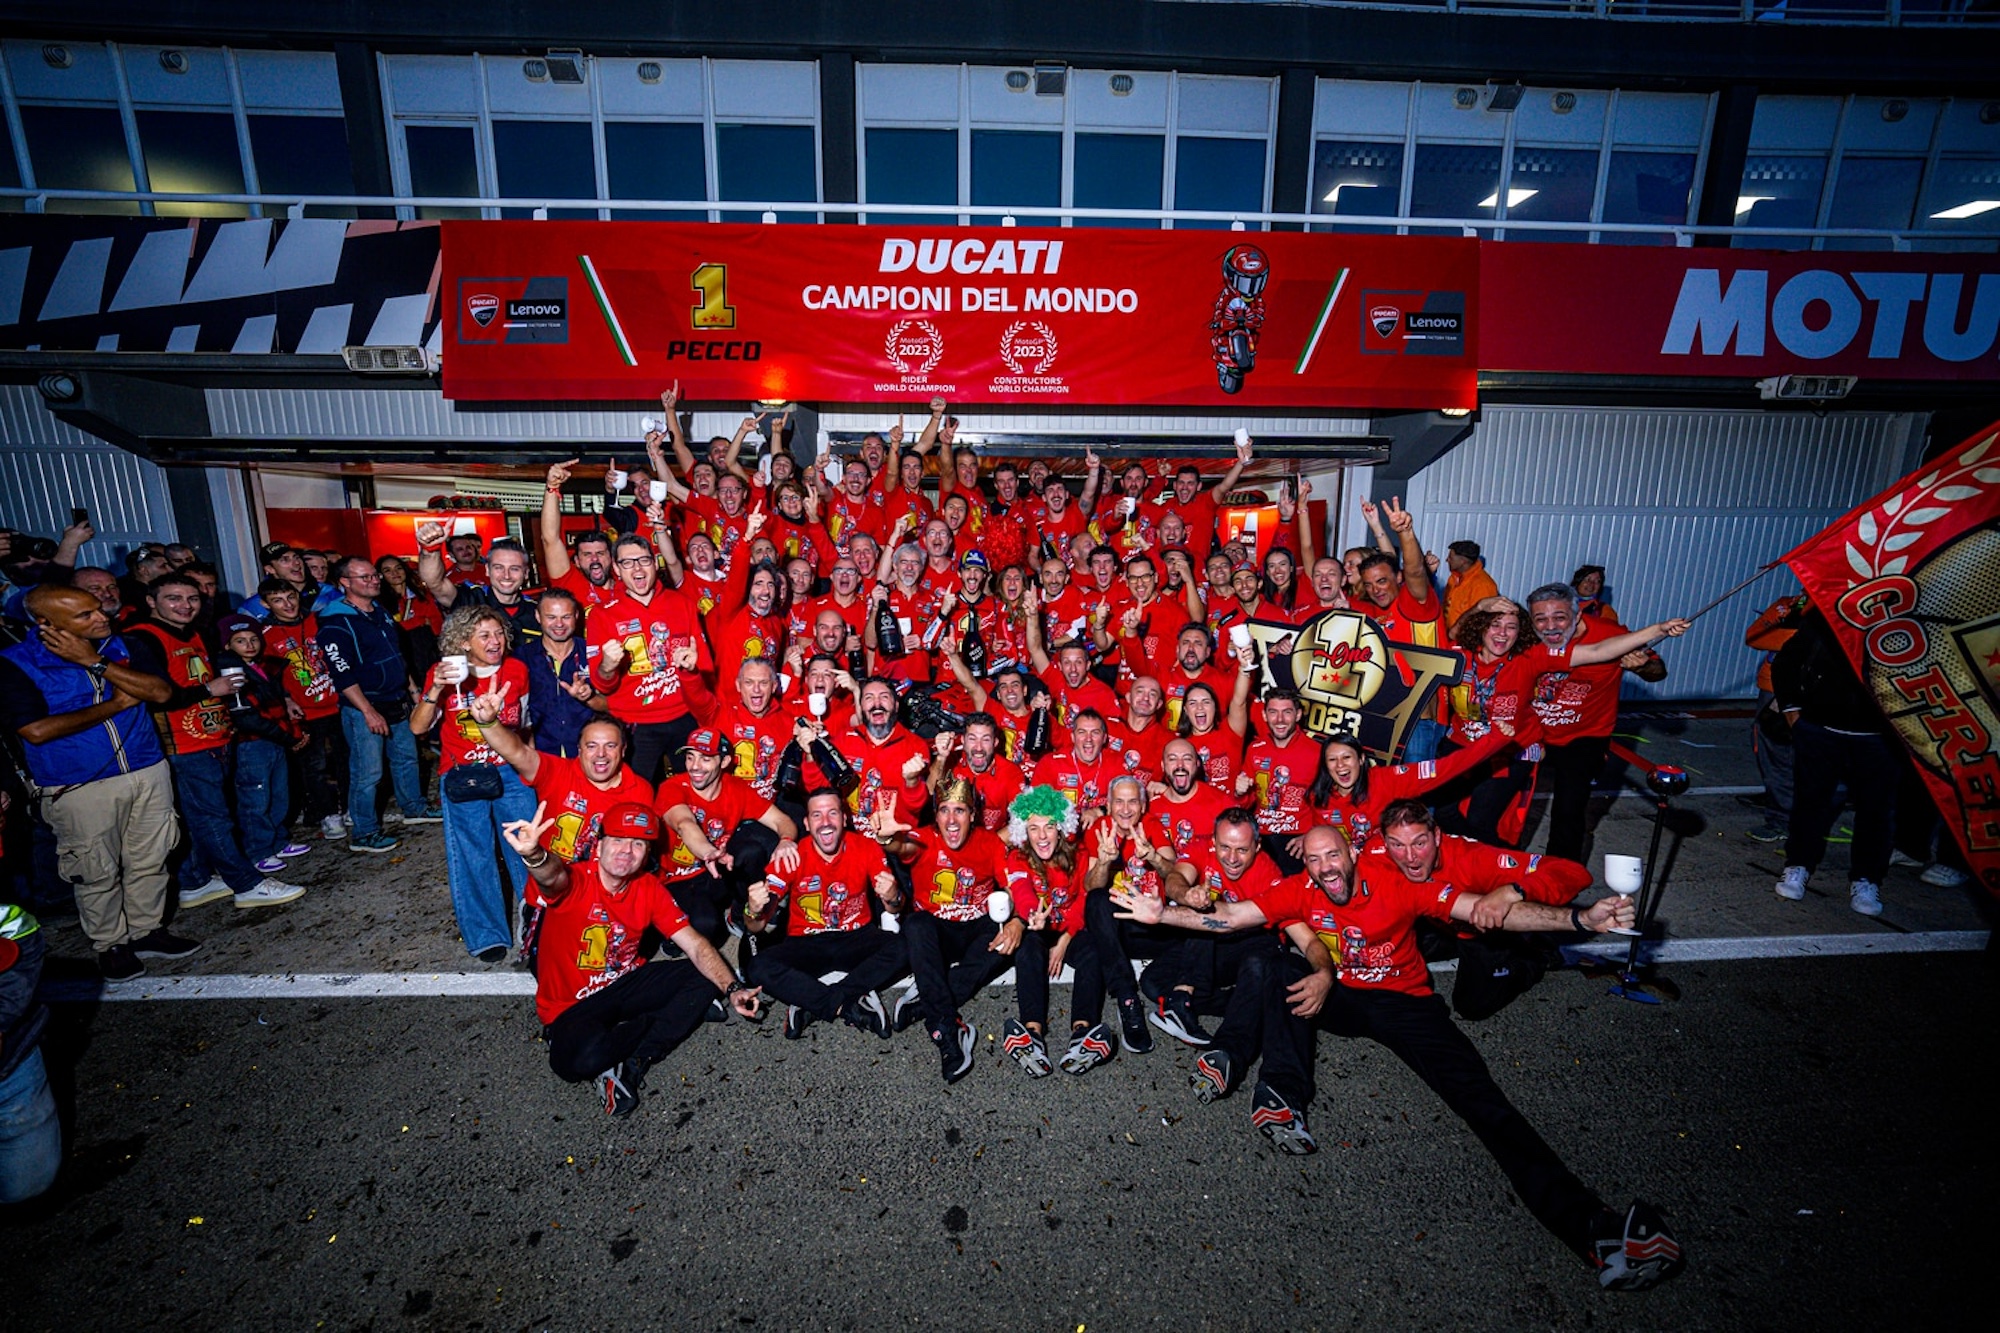 Ducati at MotoGP 2023 after the big win! Media provided by Ducati.